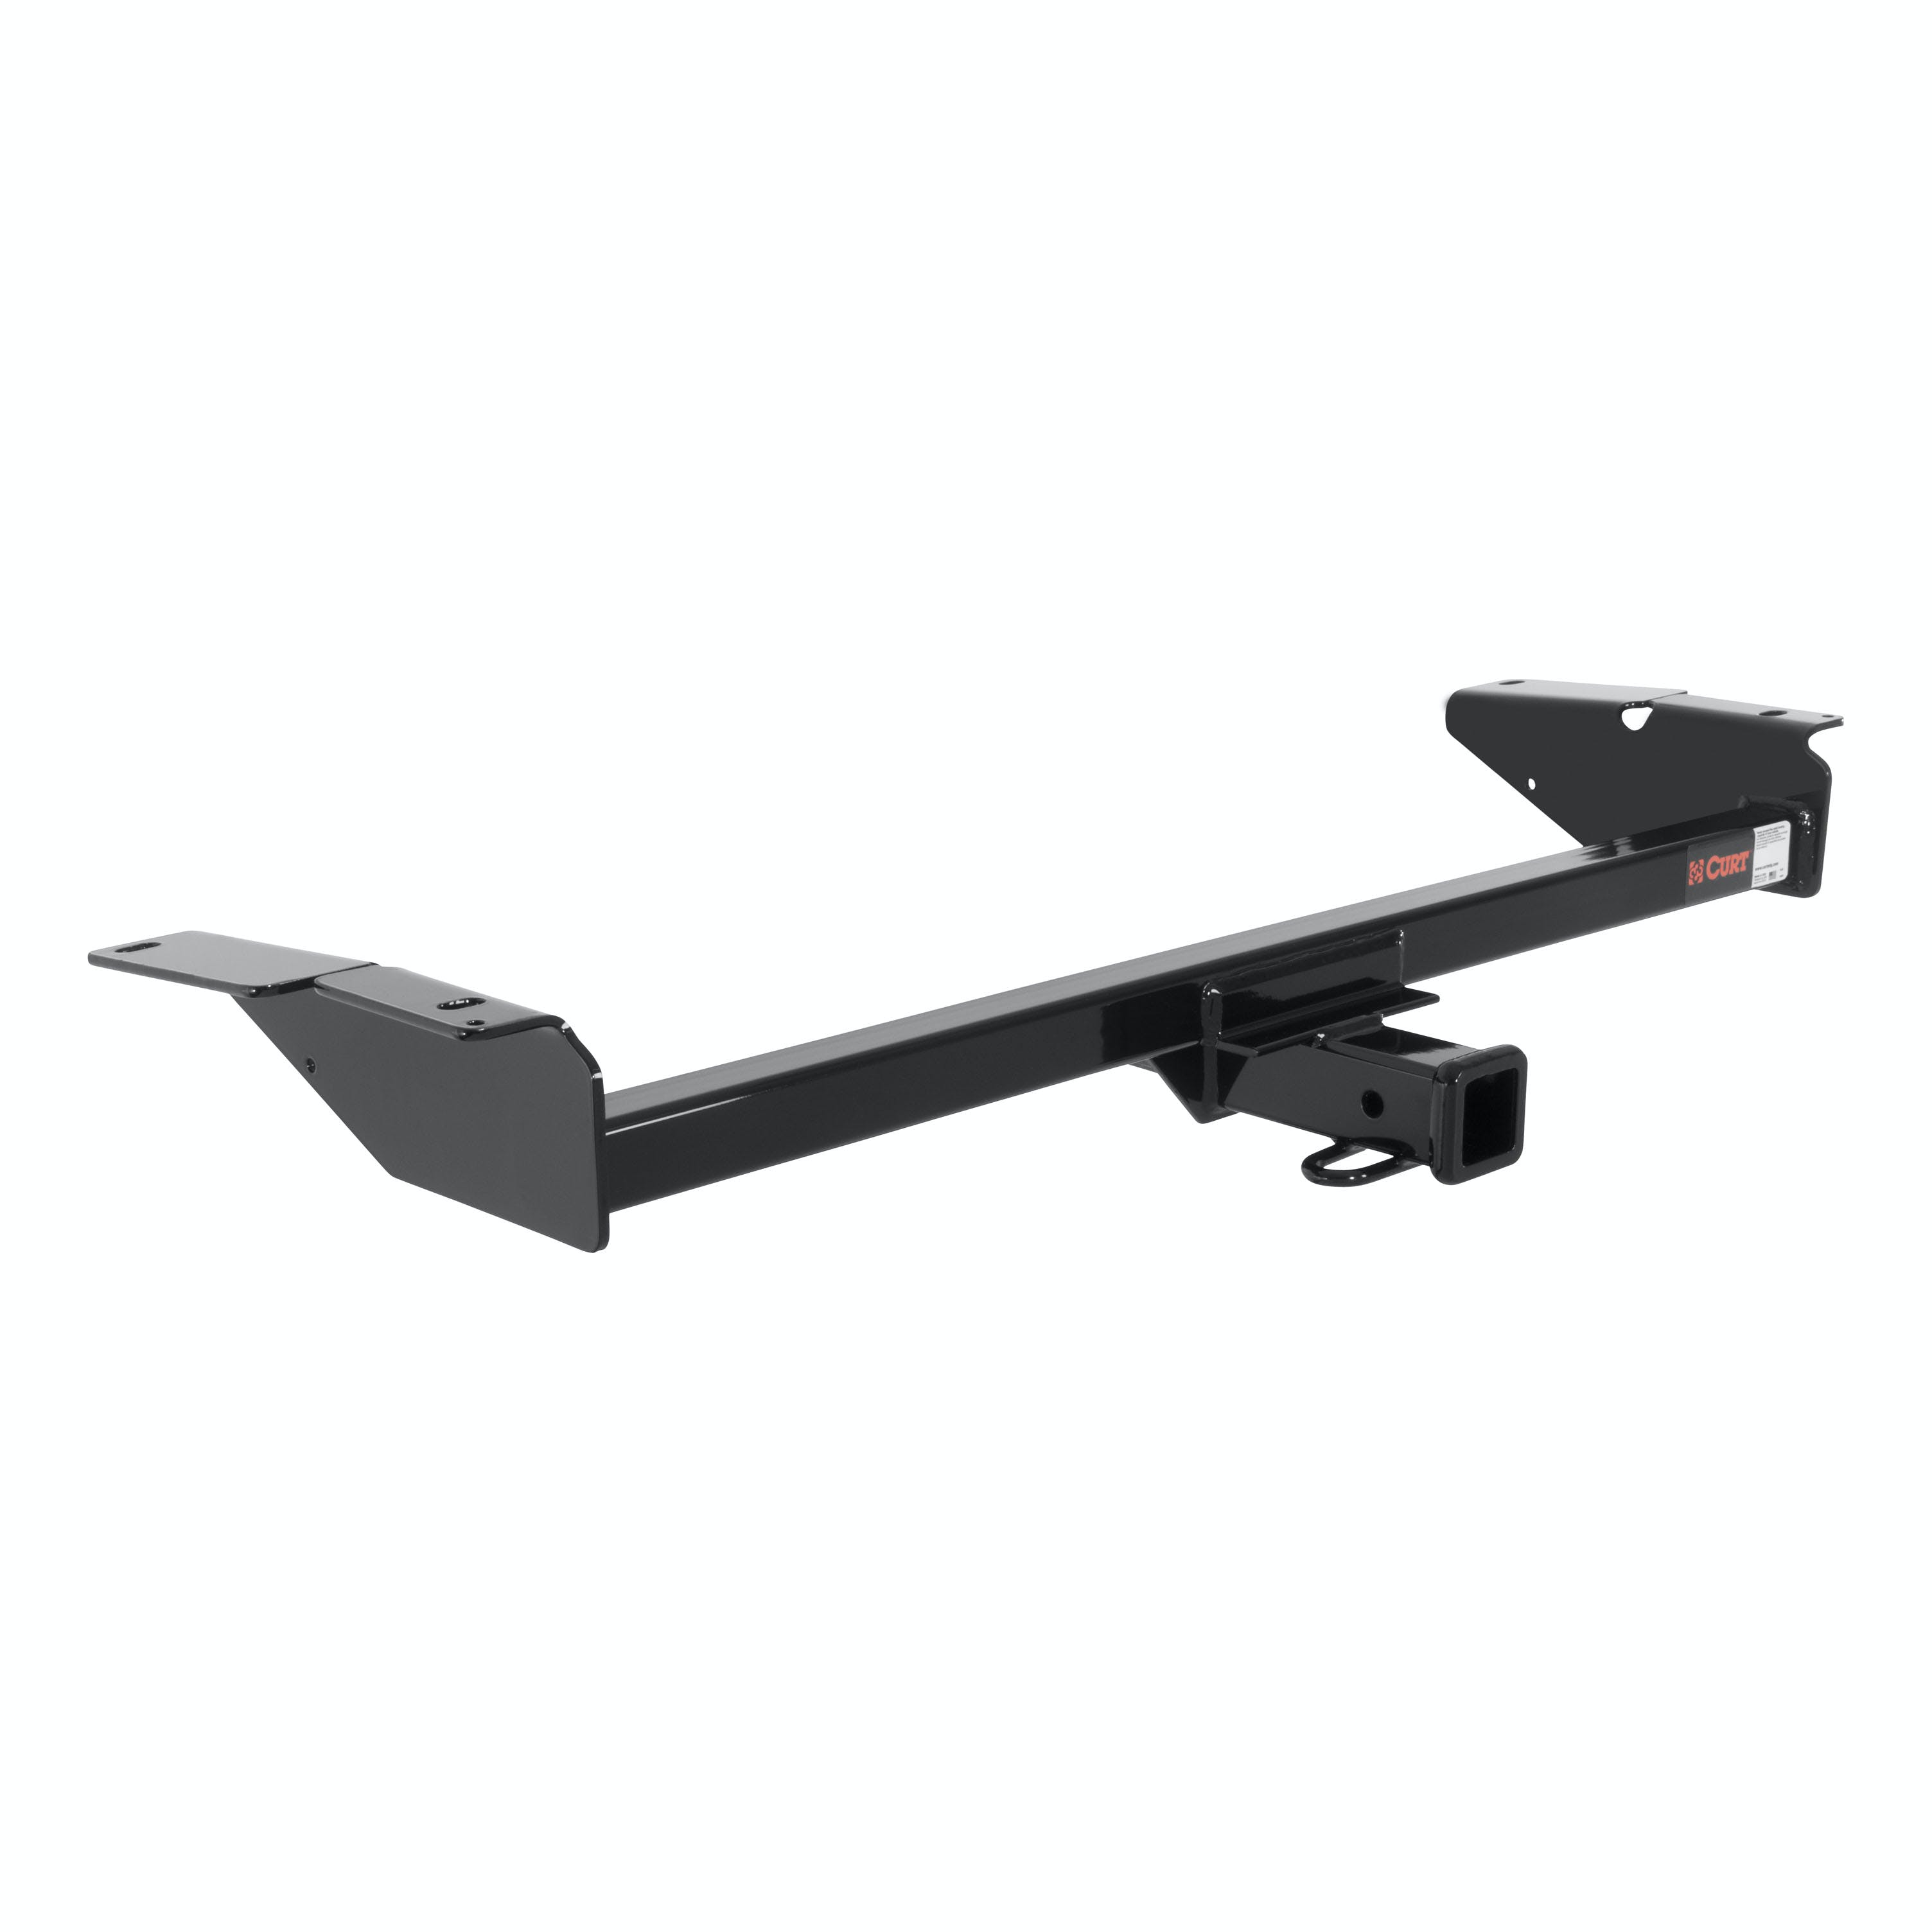 CURT 13707 Class 3 Trailer Hitch, 2 Receiver, Select Ford, Lincoln, Mercury Sedans